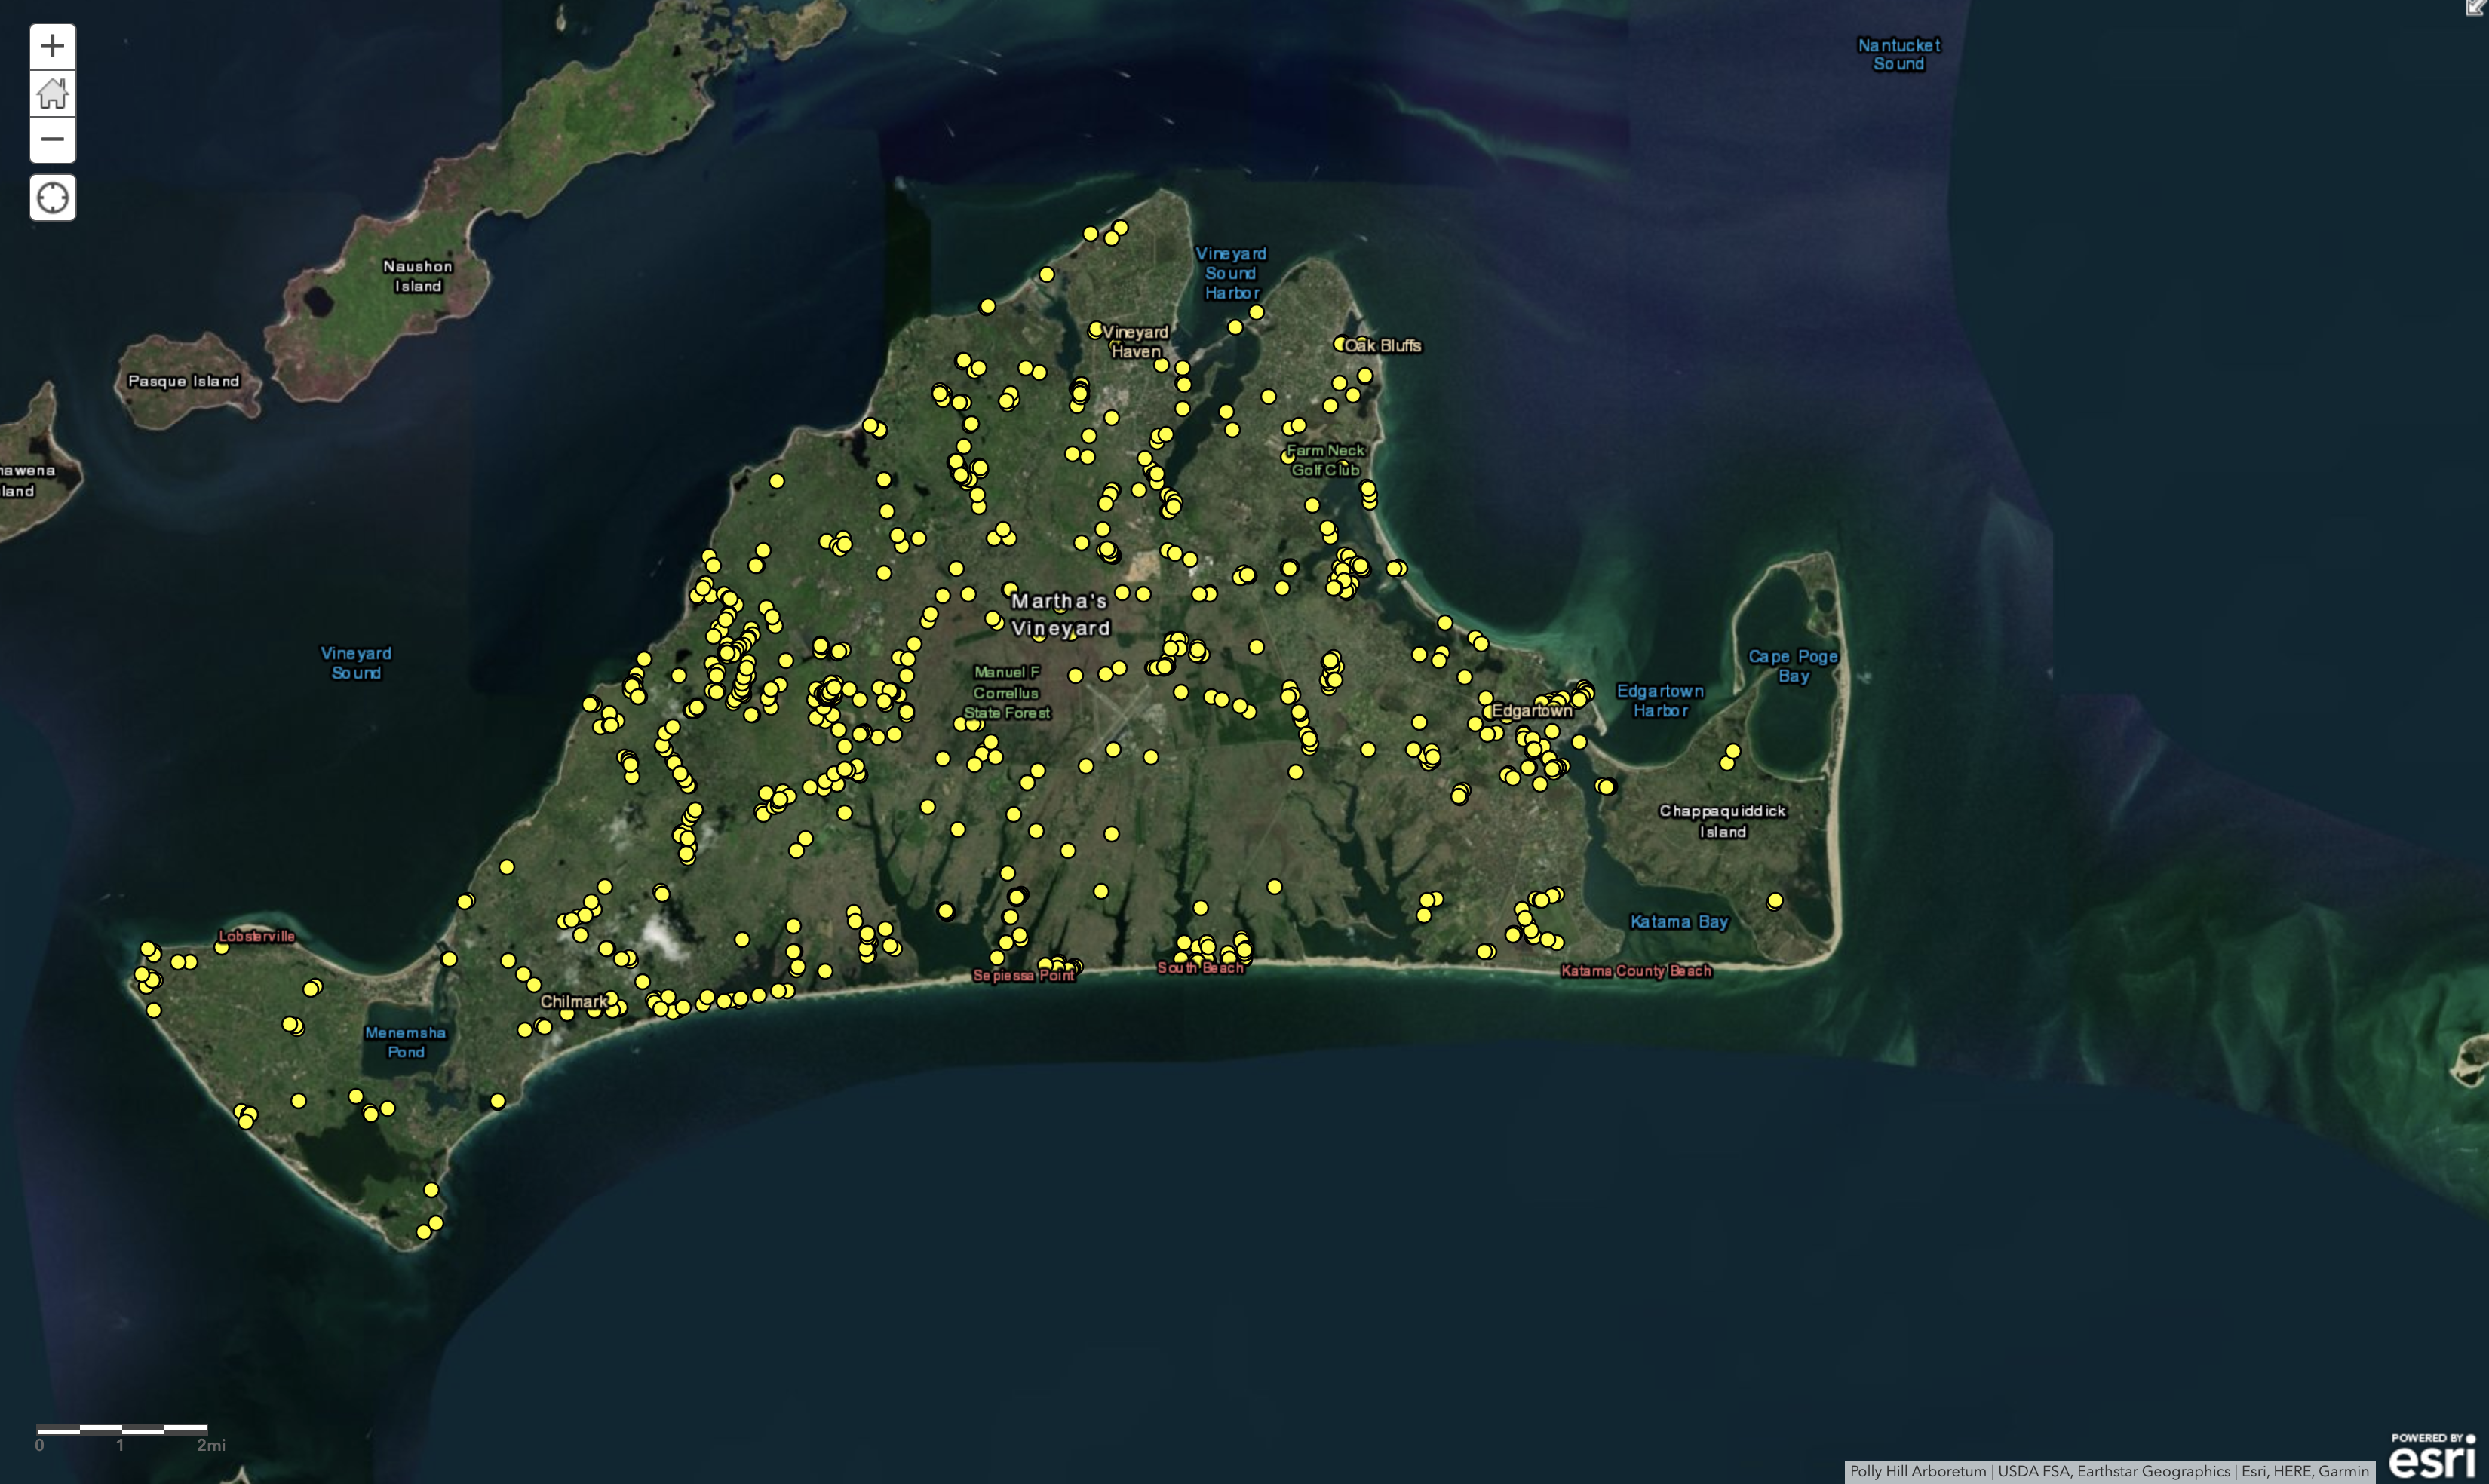 The cloud-based ArcGIS Online mapping tool, as customized by PHA, allows for collaborative data collection and management of plant records. Each dot represents a plant catalogued as part of the ConServator project.